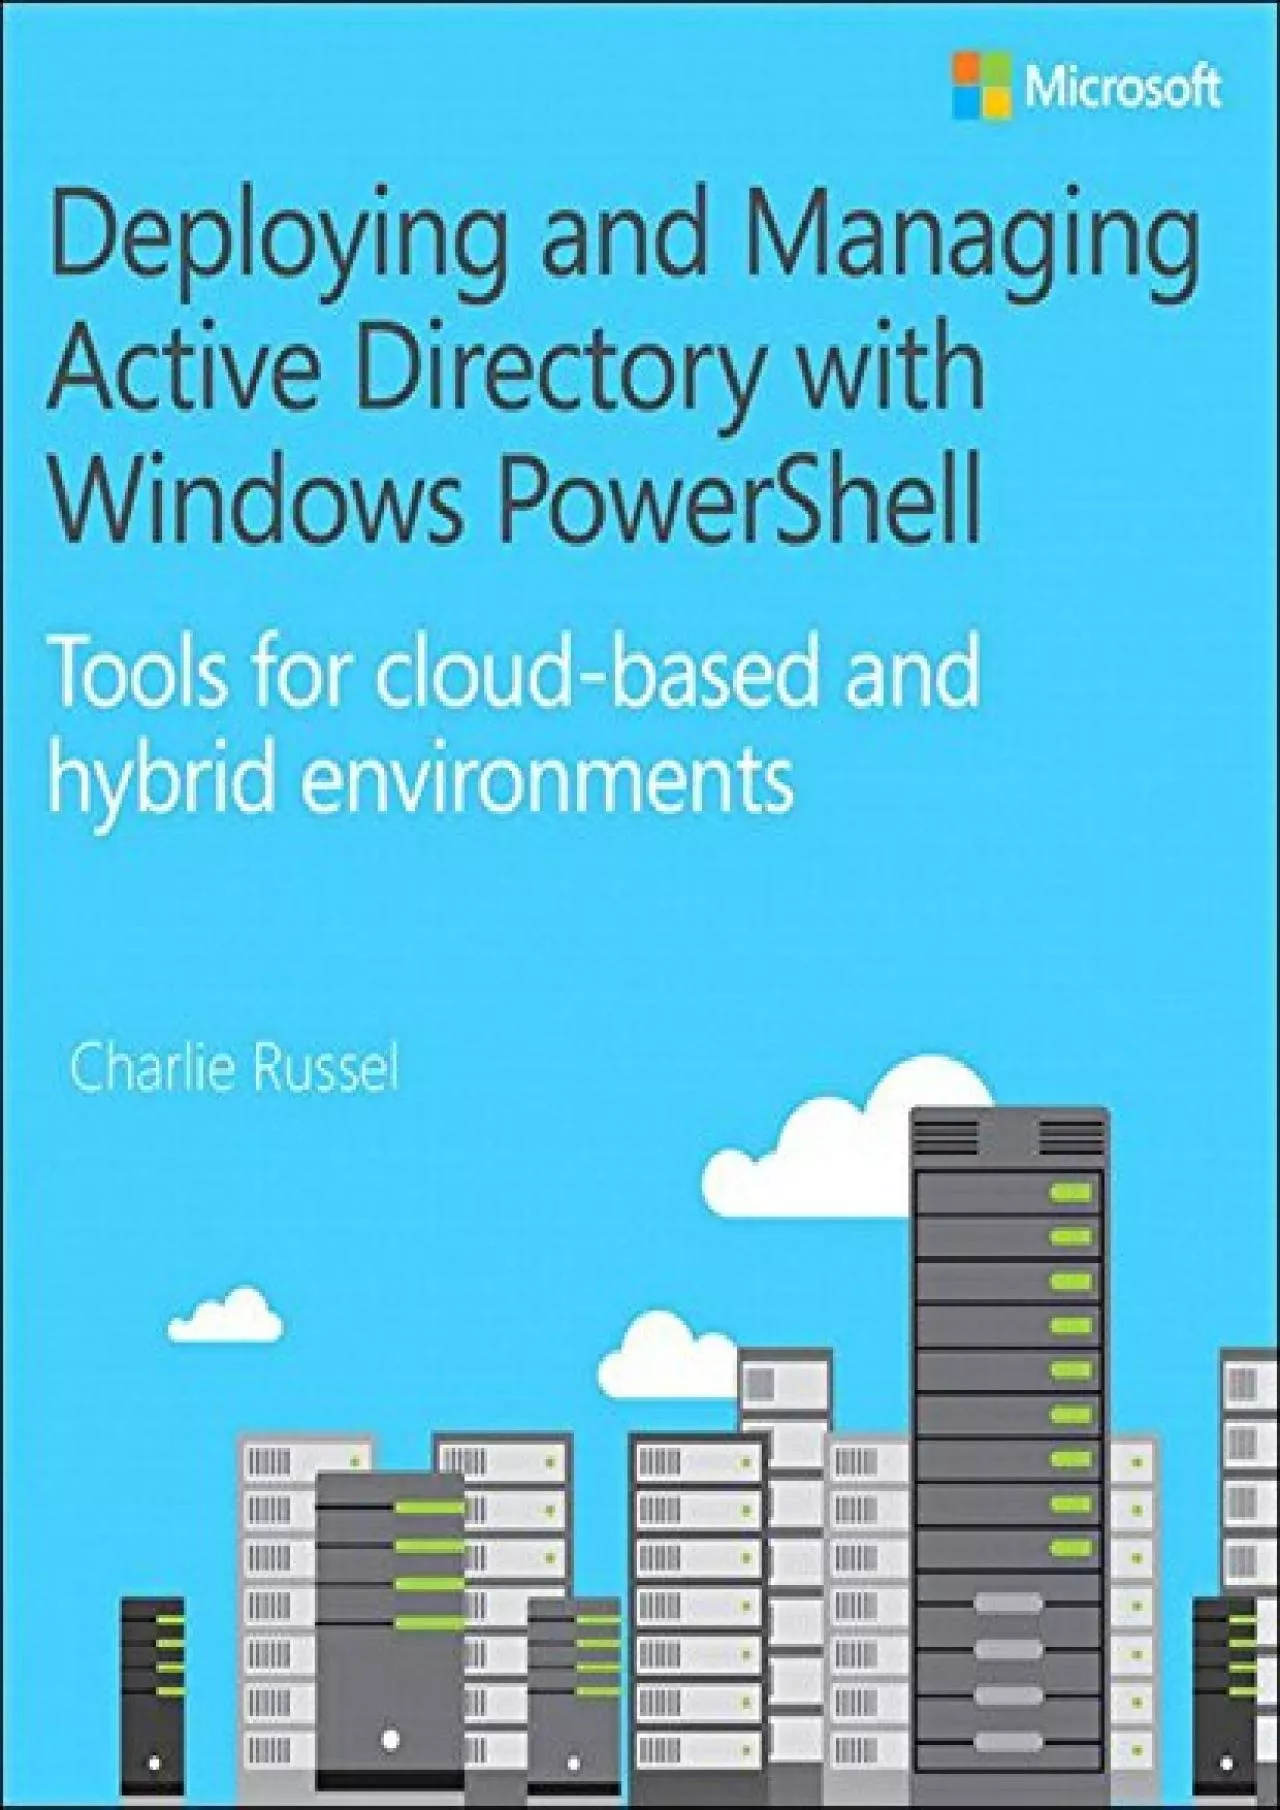 Deploying and Managing Active Directory with Windows PowerShell Tools for cloud-based